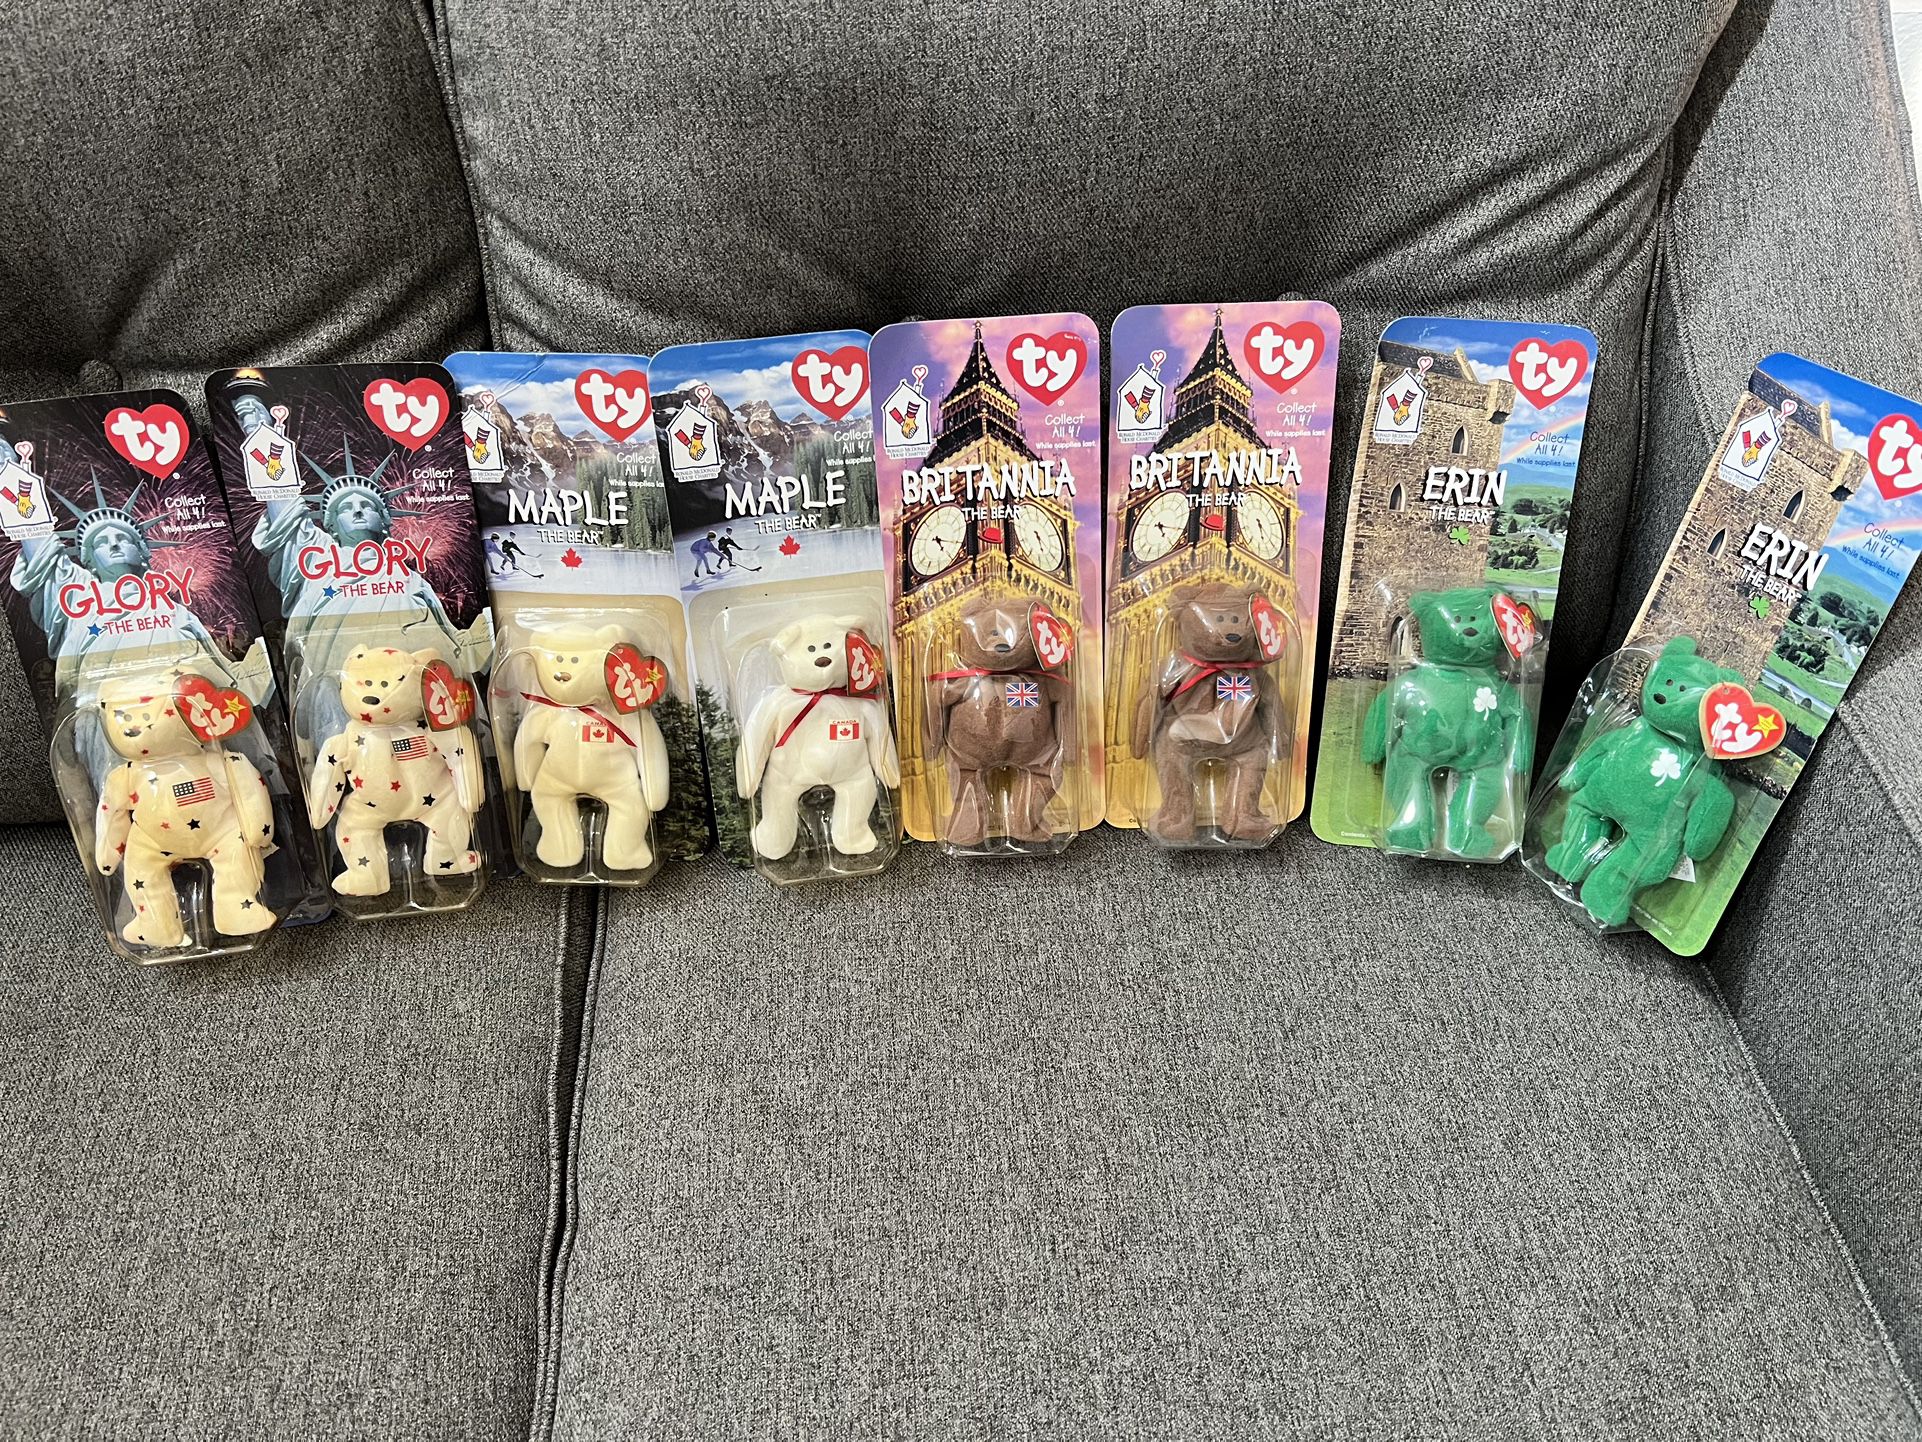 Beanie Babies (2 Complete Sets Of 4)